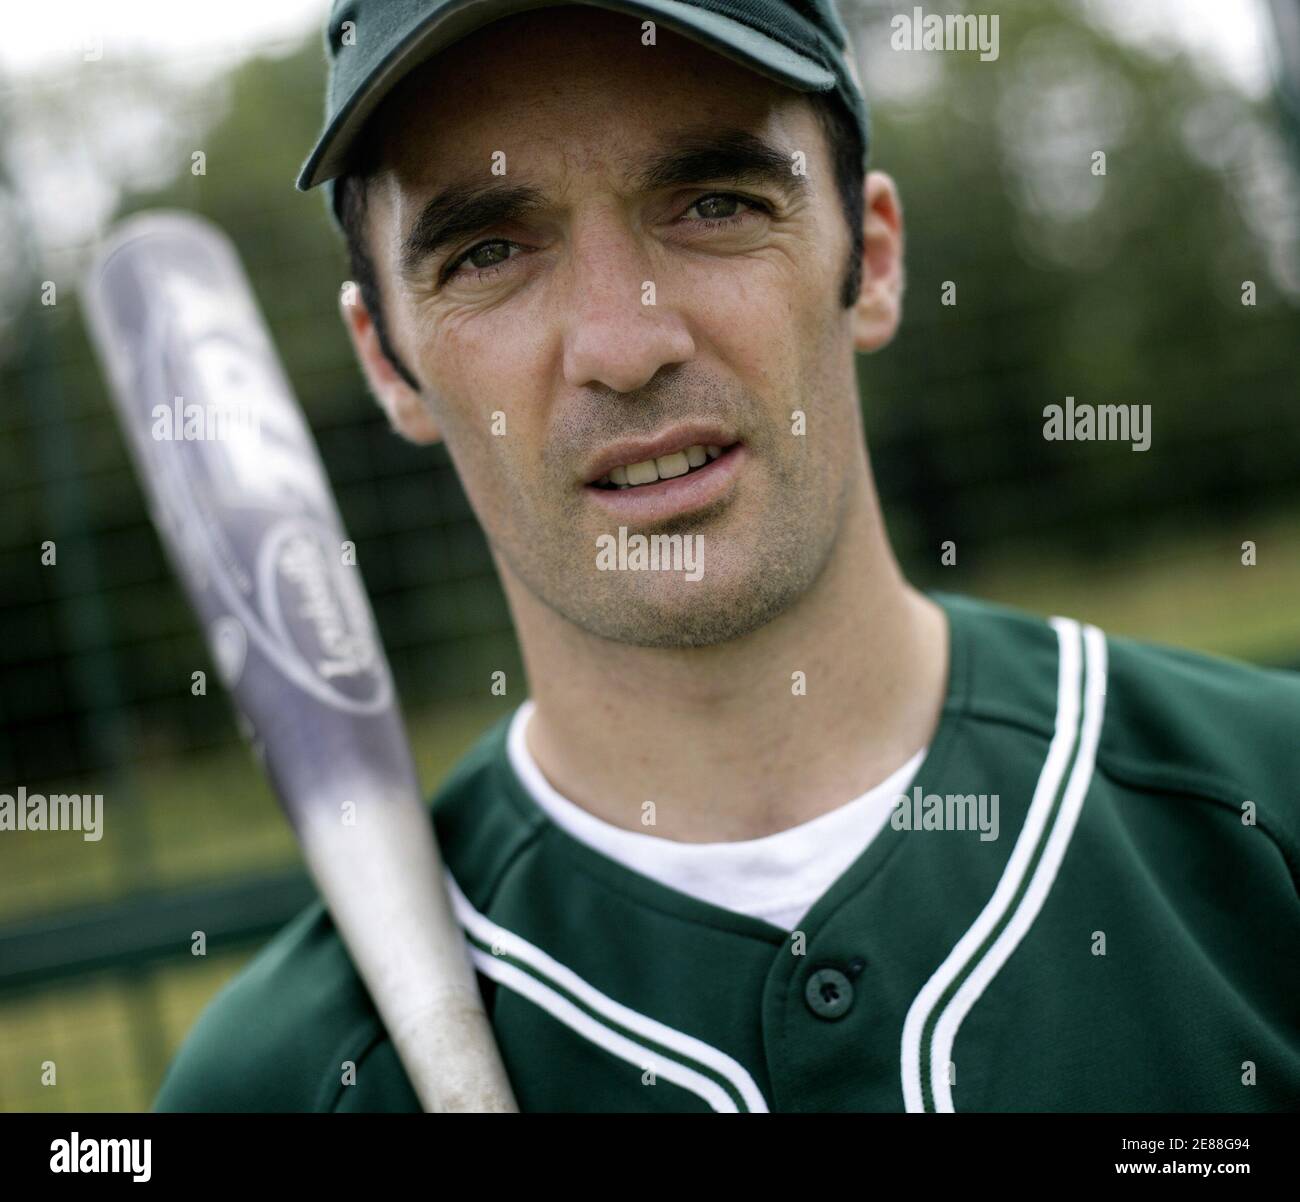 Ireland's baseball team captain John Dillon poses for a photograph at  Corkagh Park, Dublin, Ireland July 22, 2006. Ireland's national team are  not only gunning for a place in the European premier